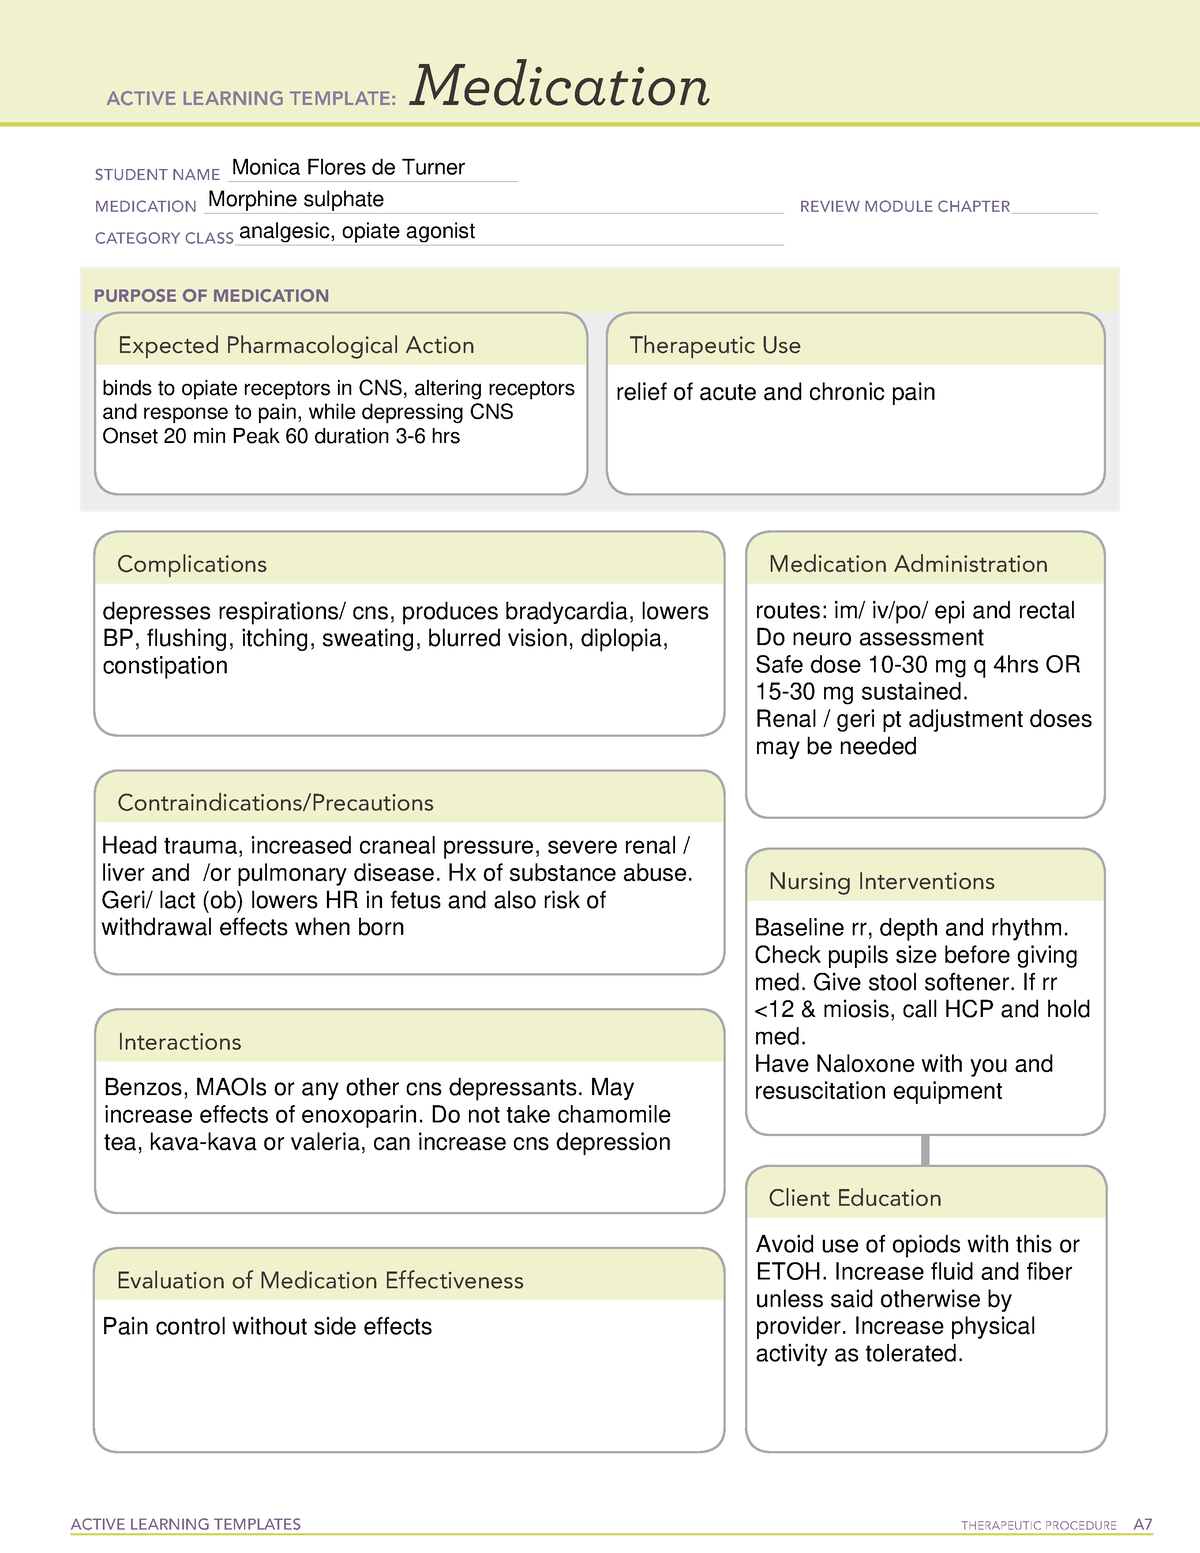 morphine-ati-template-for-medication-active-learning-templates-therapeutic-procedure-a